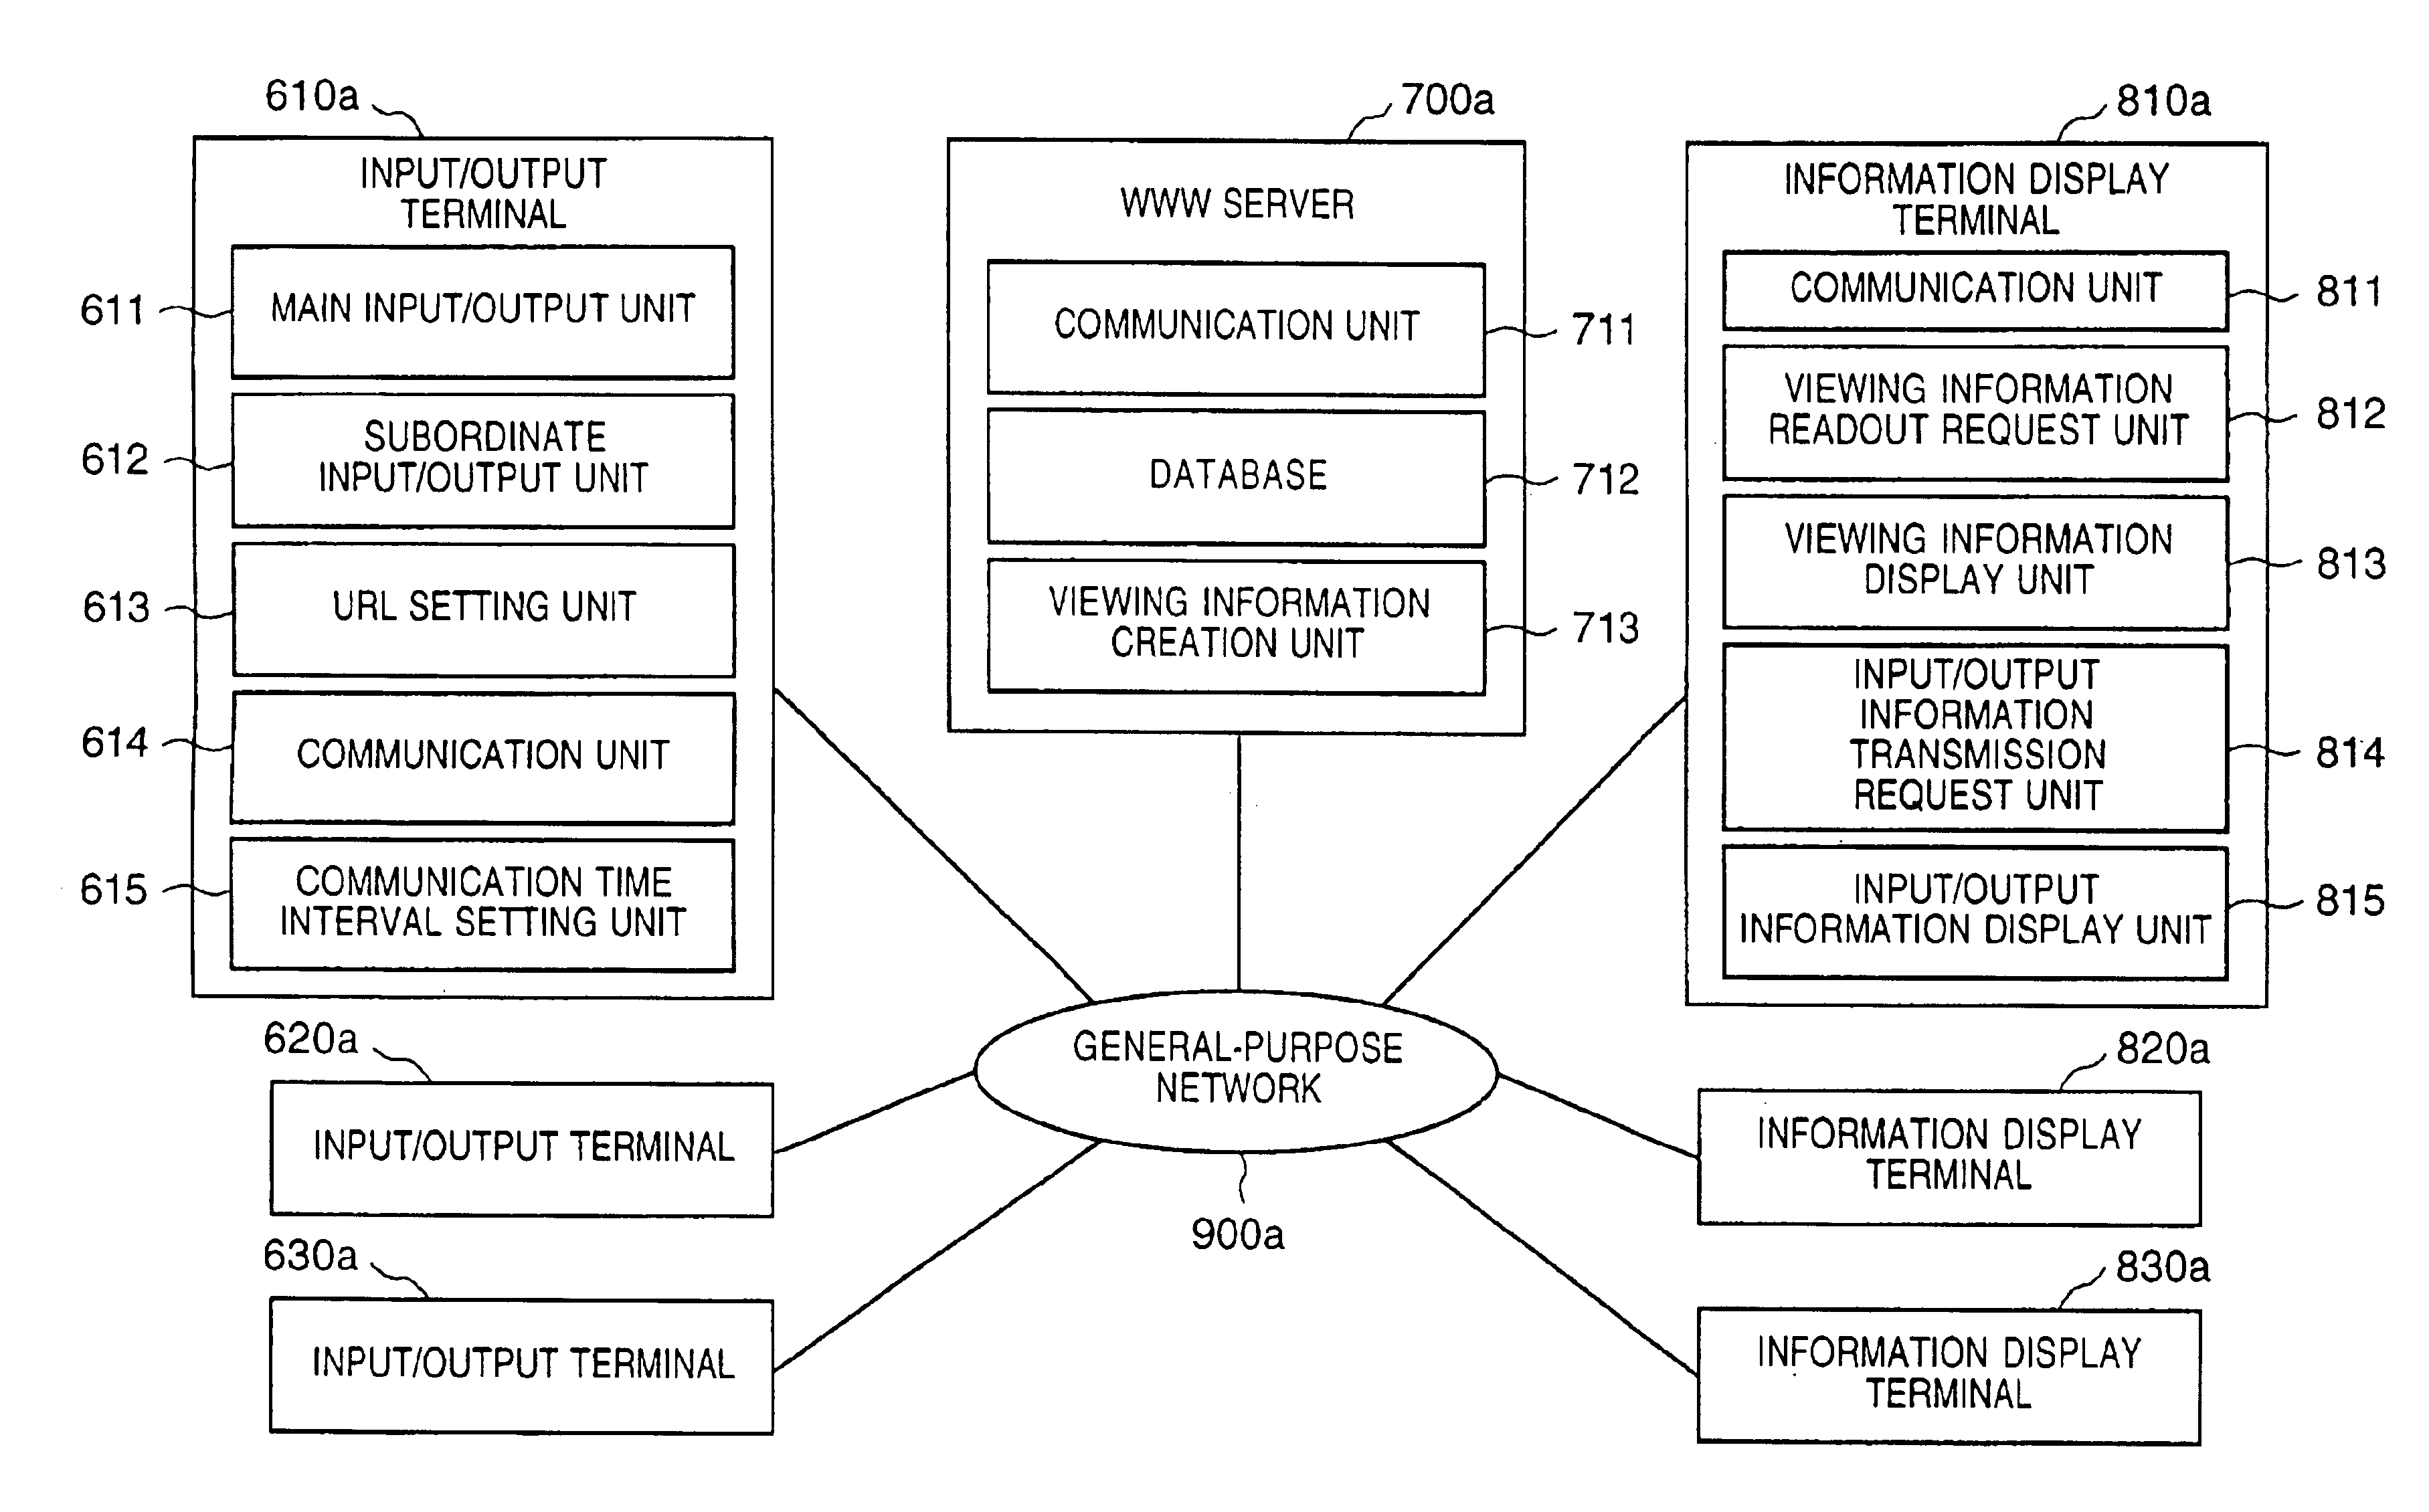 System for providing location information from a remote terminal and displaying on a map display as a URL